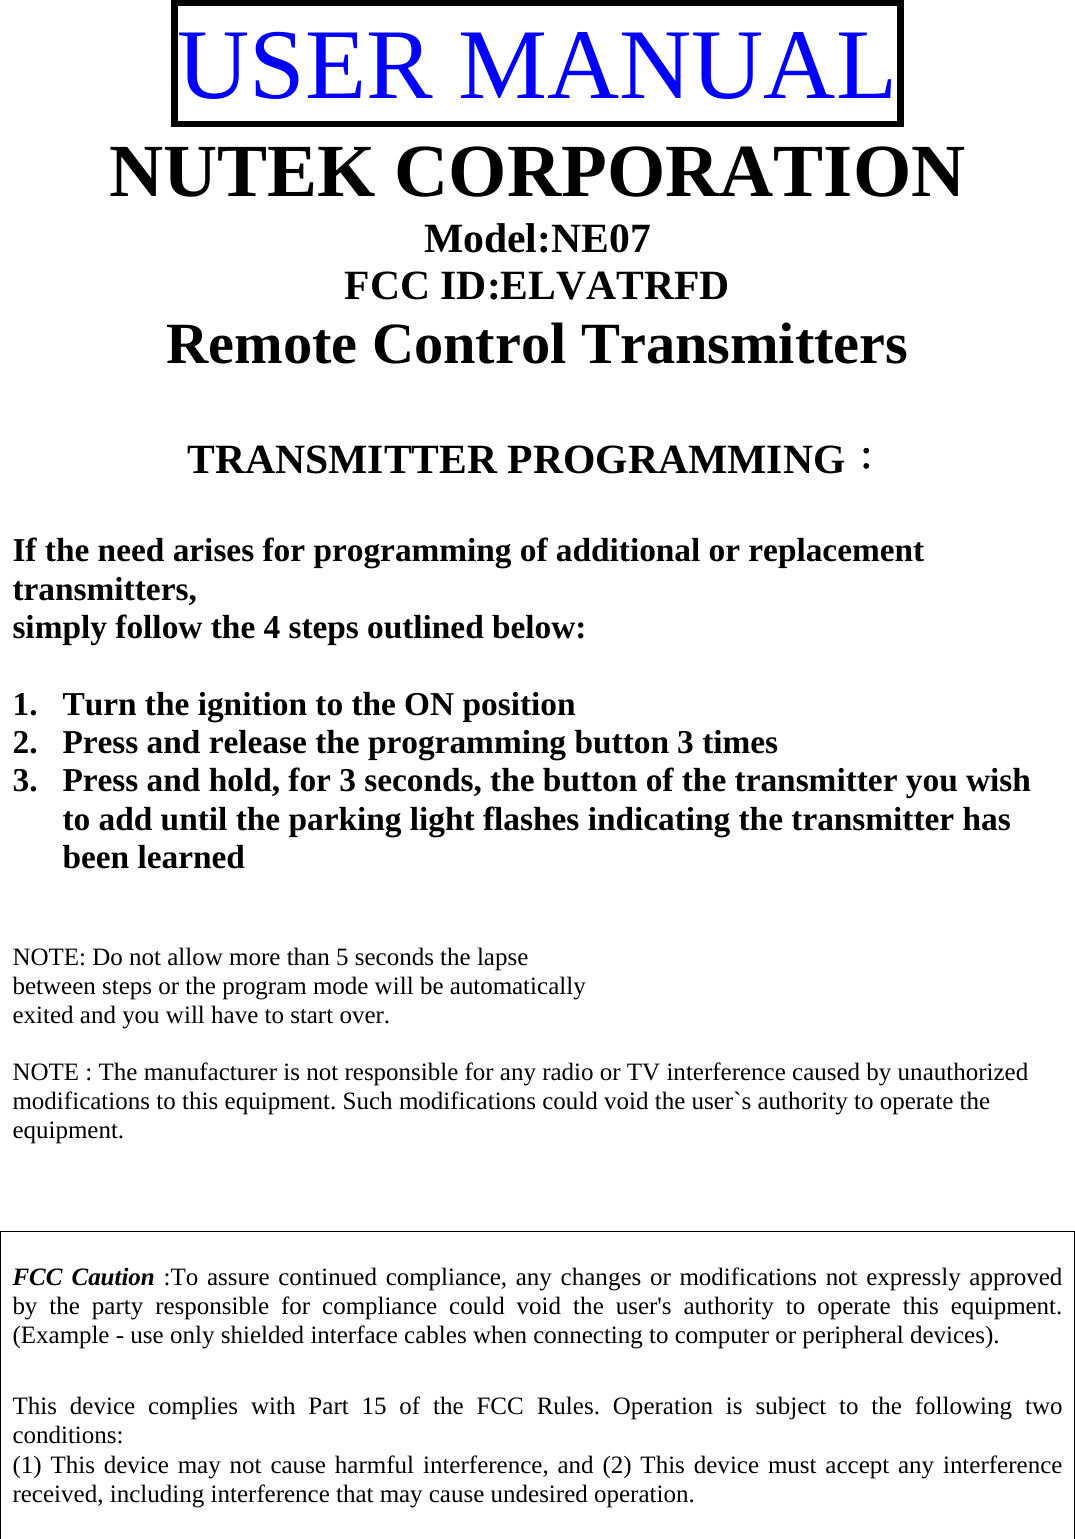 USER MANUAL NUTEK CORPORATION Model:NE07 FCC ID:ELVATRFD Remote Control Transmitters   TRANSMITTER PROGRAMMING：  If the need arises for programming of additional or replacement transmitters, simply follow the 4 steps outlined below:  1. Turn the ignition to the ON position  2. Press and release the programming button 3 times  3. Press and hold, for 3 seconds, the button of the transmitter you wish to add until the parking light flashes indicating the transmitter has been learned   NOTE: Do not allow more than 5 seconds the lapse  between steps or the program mode will be automatically  exited and you will have to start over.  NOTE : The manufacturer is not responsible for any radio or TV interference caused by unauthorized modifications to this equipment. Such modifications could void the user`s authority to operate the equipment.    FCC Caution :To assure continued compliance, any changes or modifications not expressly approved by the party responsible for compliance could void the user&apos;s authority to operate this equipment. (Example - use only shielded interface cables when connecting to computer or peripheral devices).  This device complies with Part 15 of the FCC Rules. Operation is subject to the following two conditions: (1) This device may not cause harmful interference, and (2) This device must accept any interference received, including interference that may cause undesired operation.  